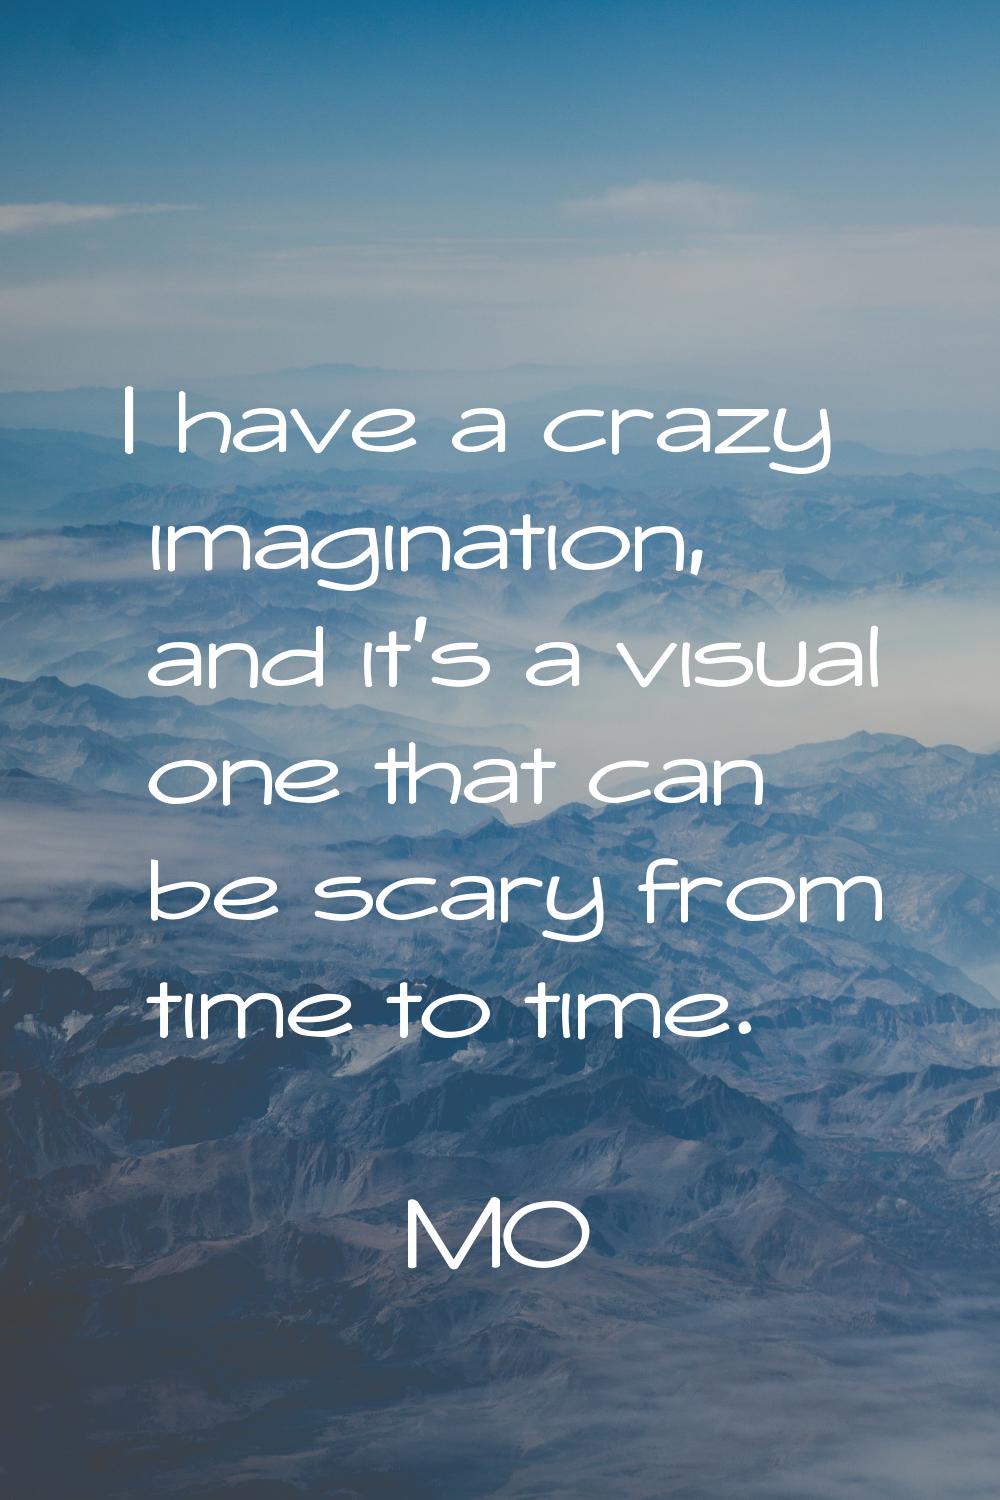 I have a crazy imagination, and it's a visual one that can be scary from time to time.